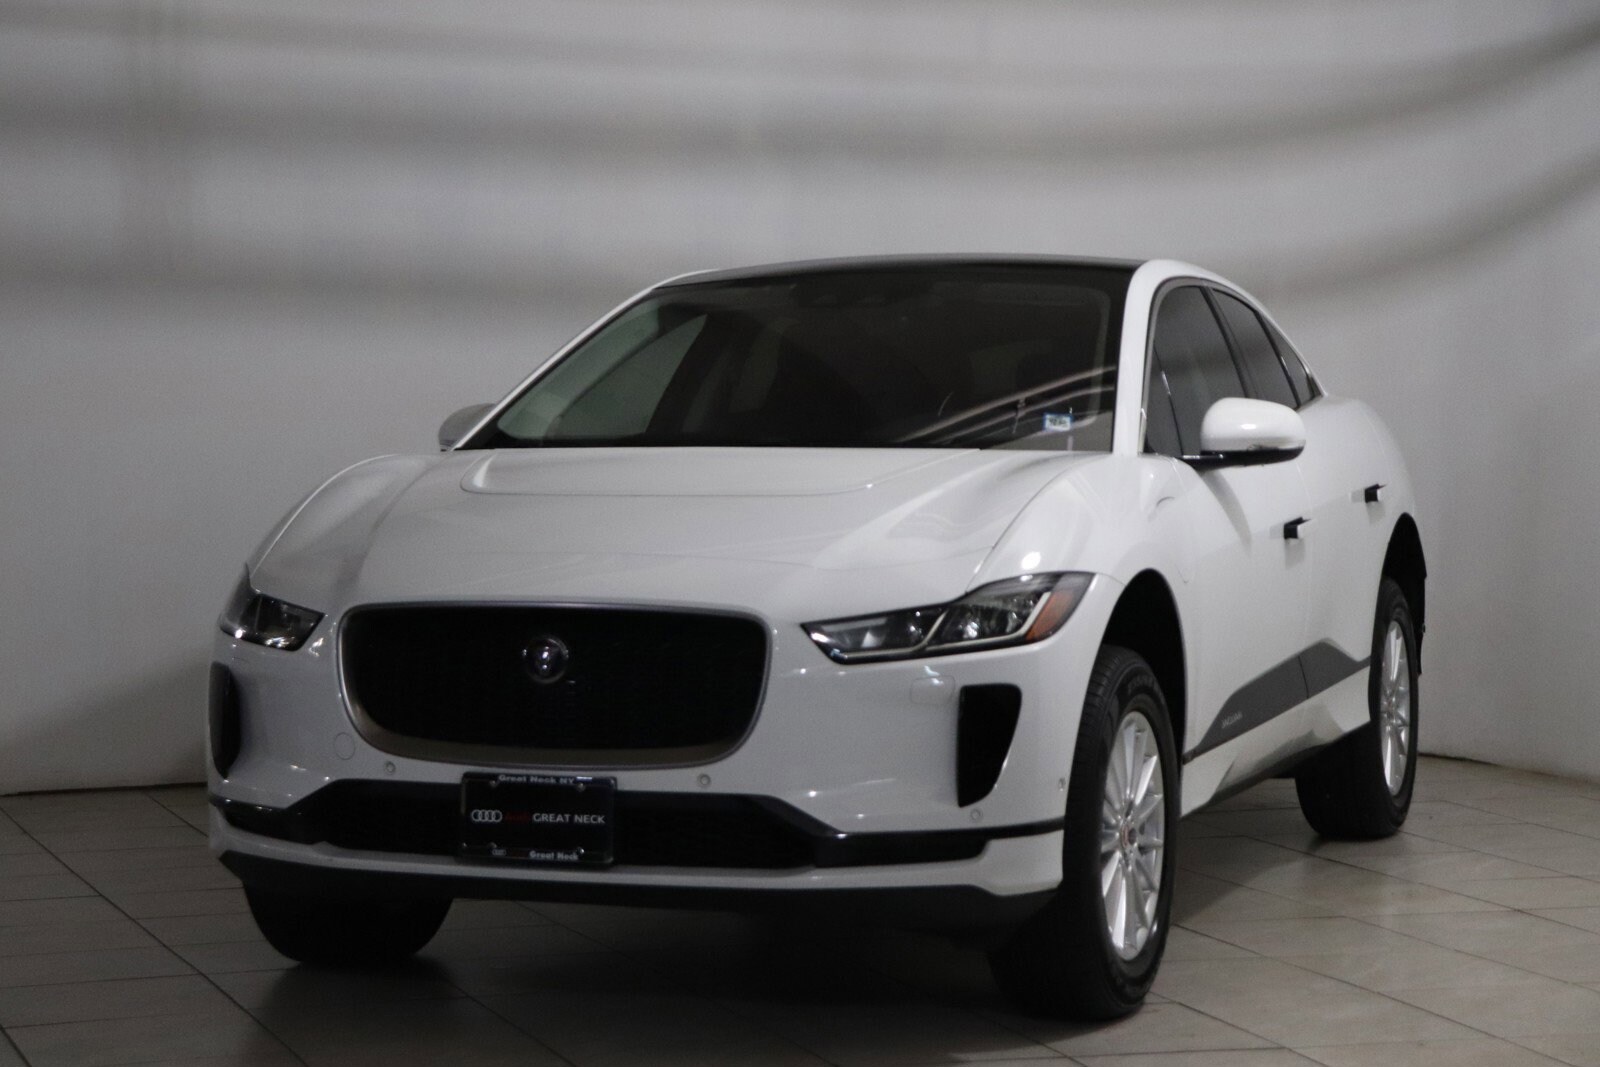 Used 2019 Jaguar I-PACE S with VIN SADHB2S11K1F75923 for sale in Great Neck, NY